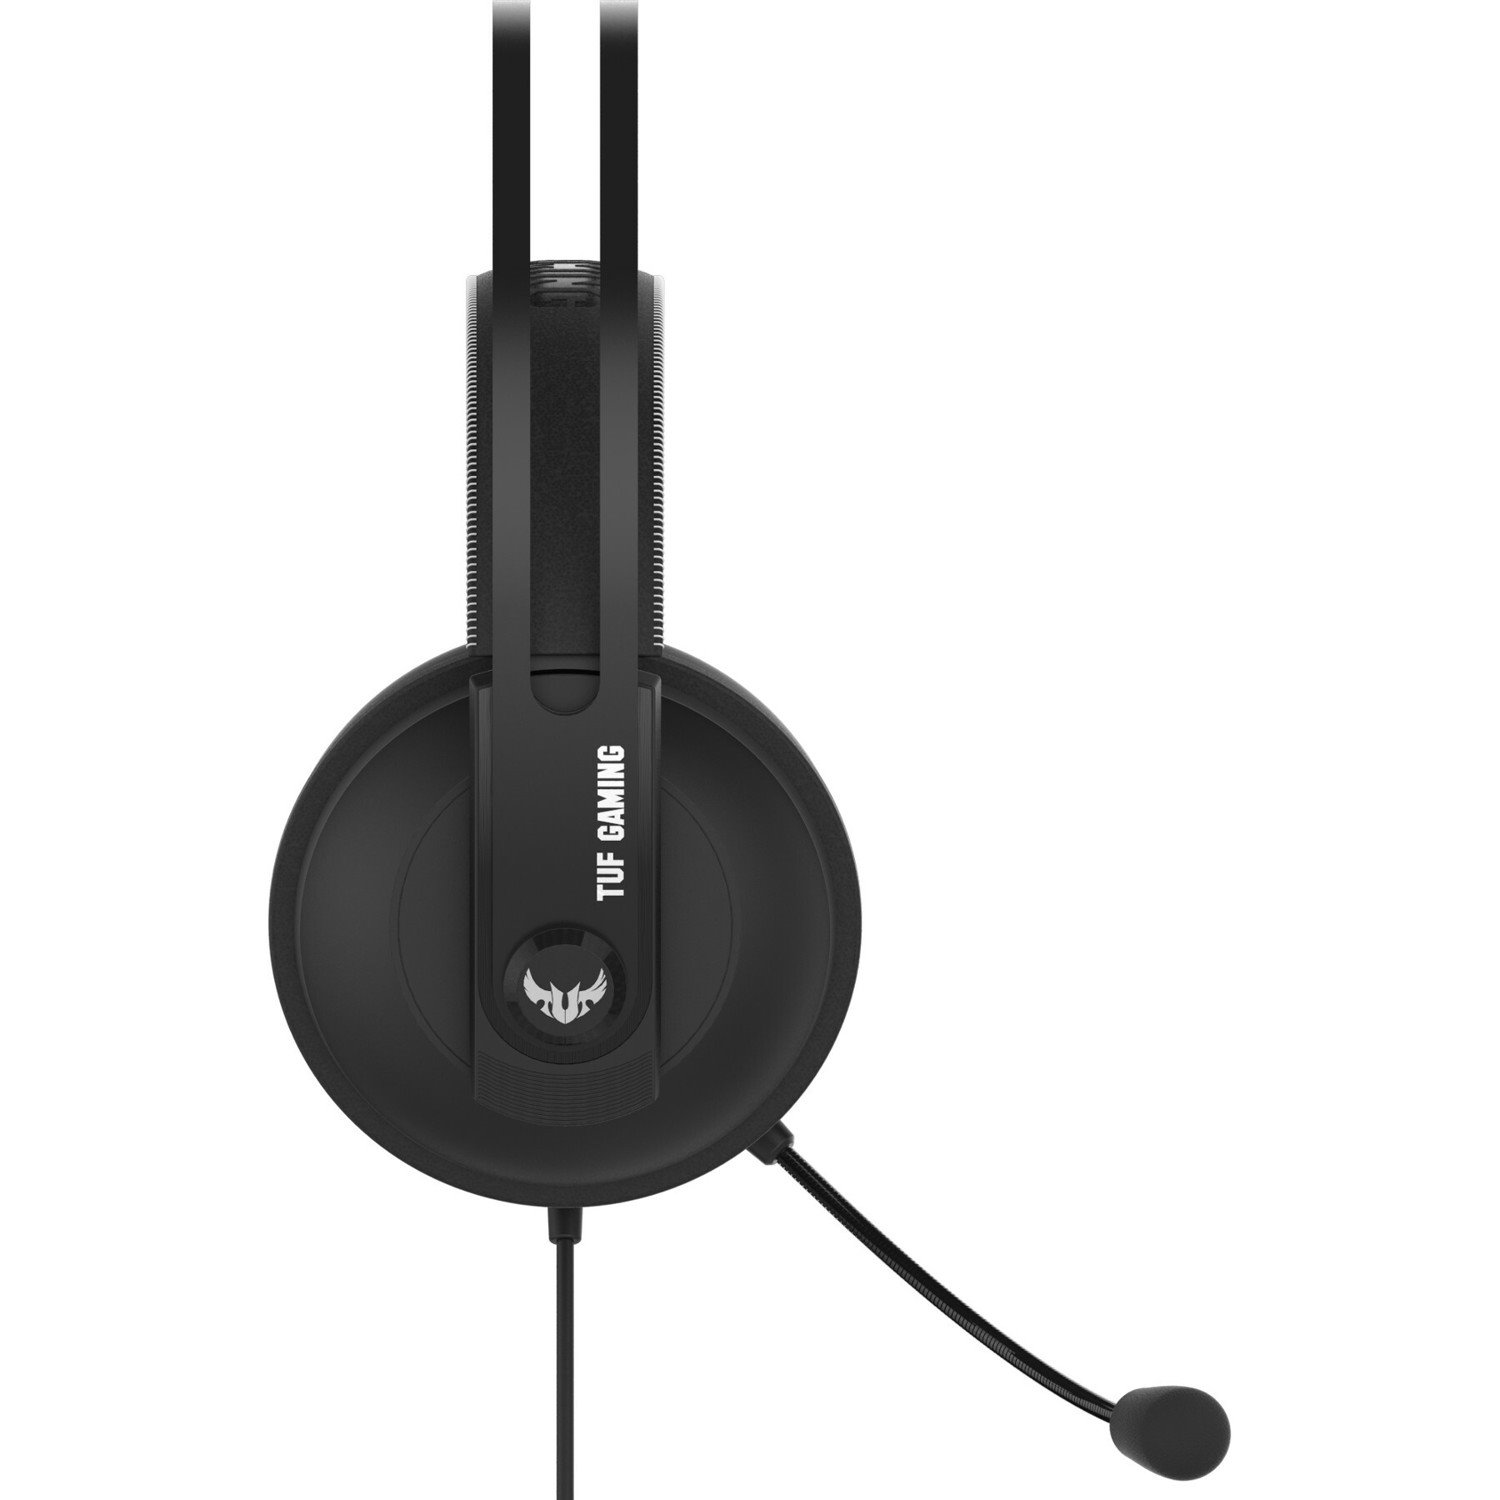 TUF Gaming H7 Wired Over-the-head Stereo Gaming Headset